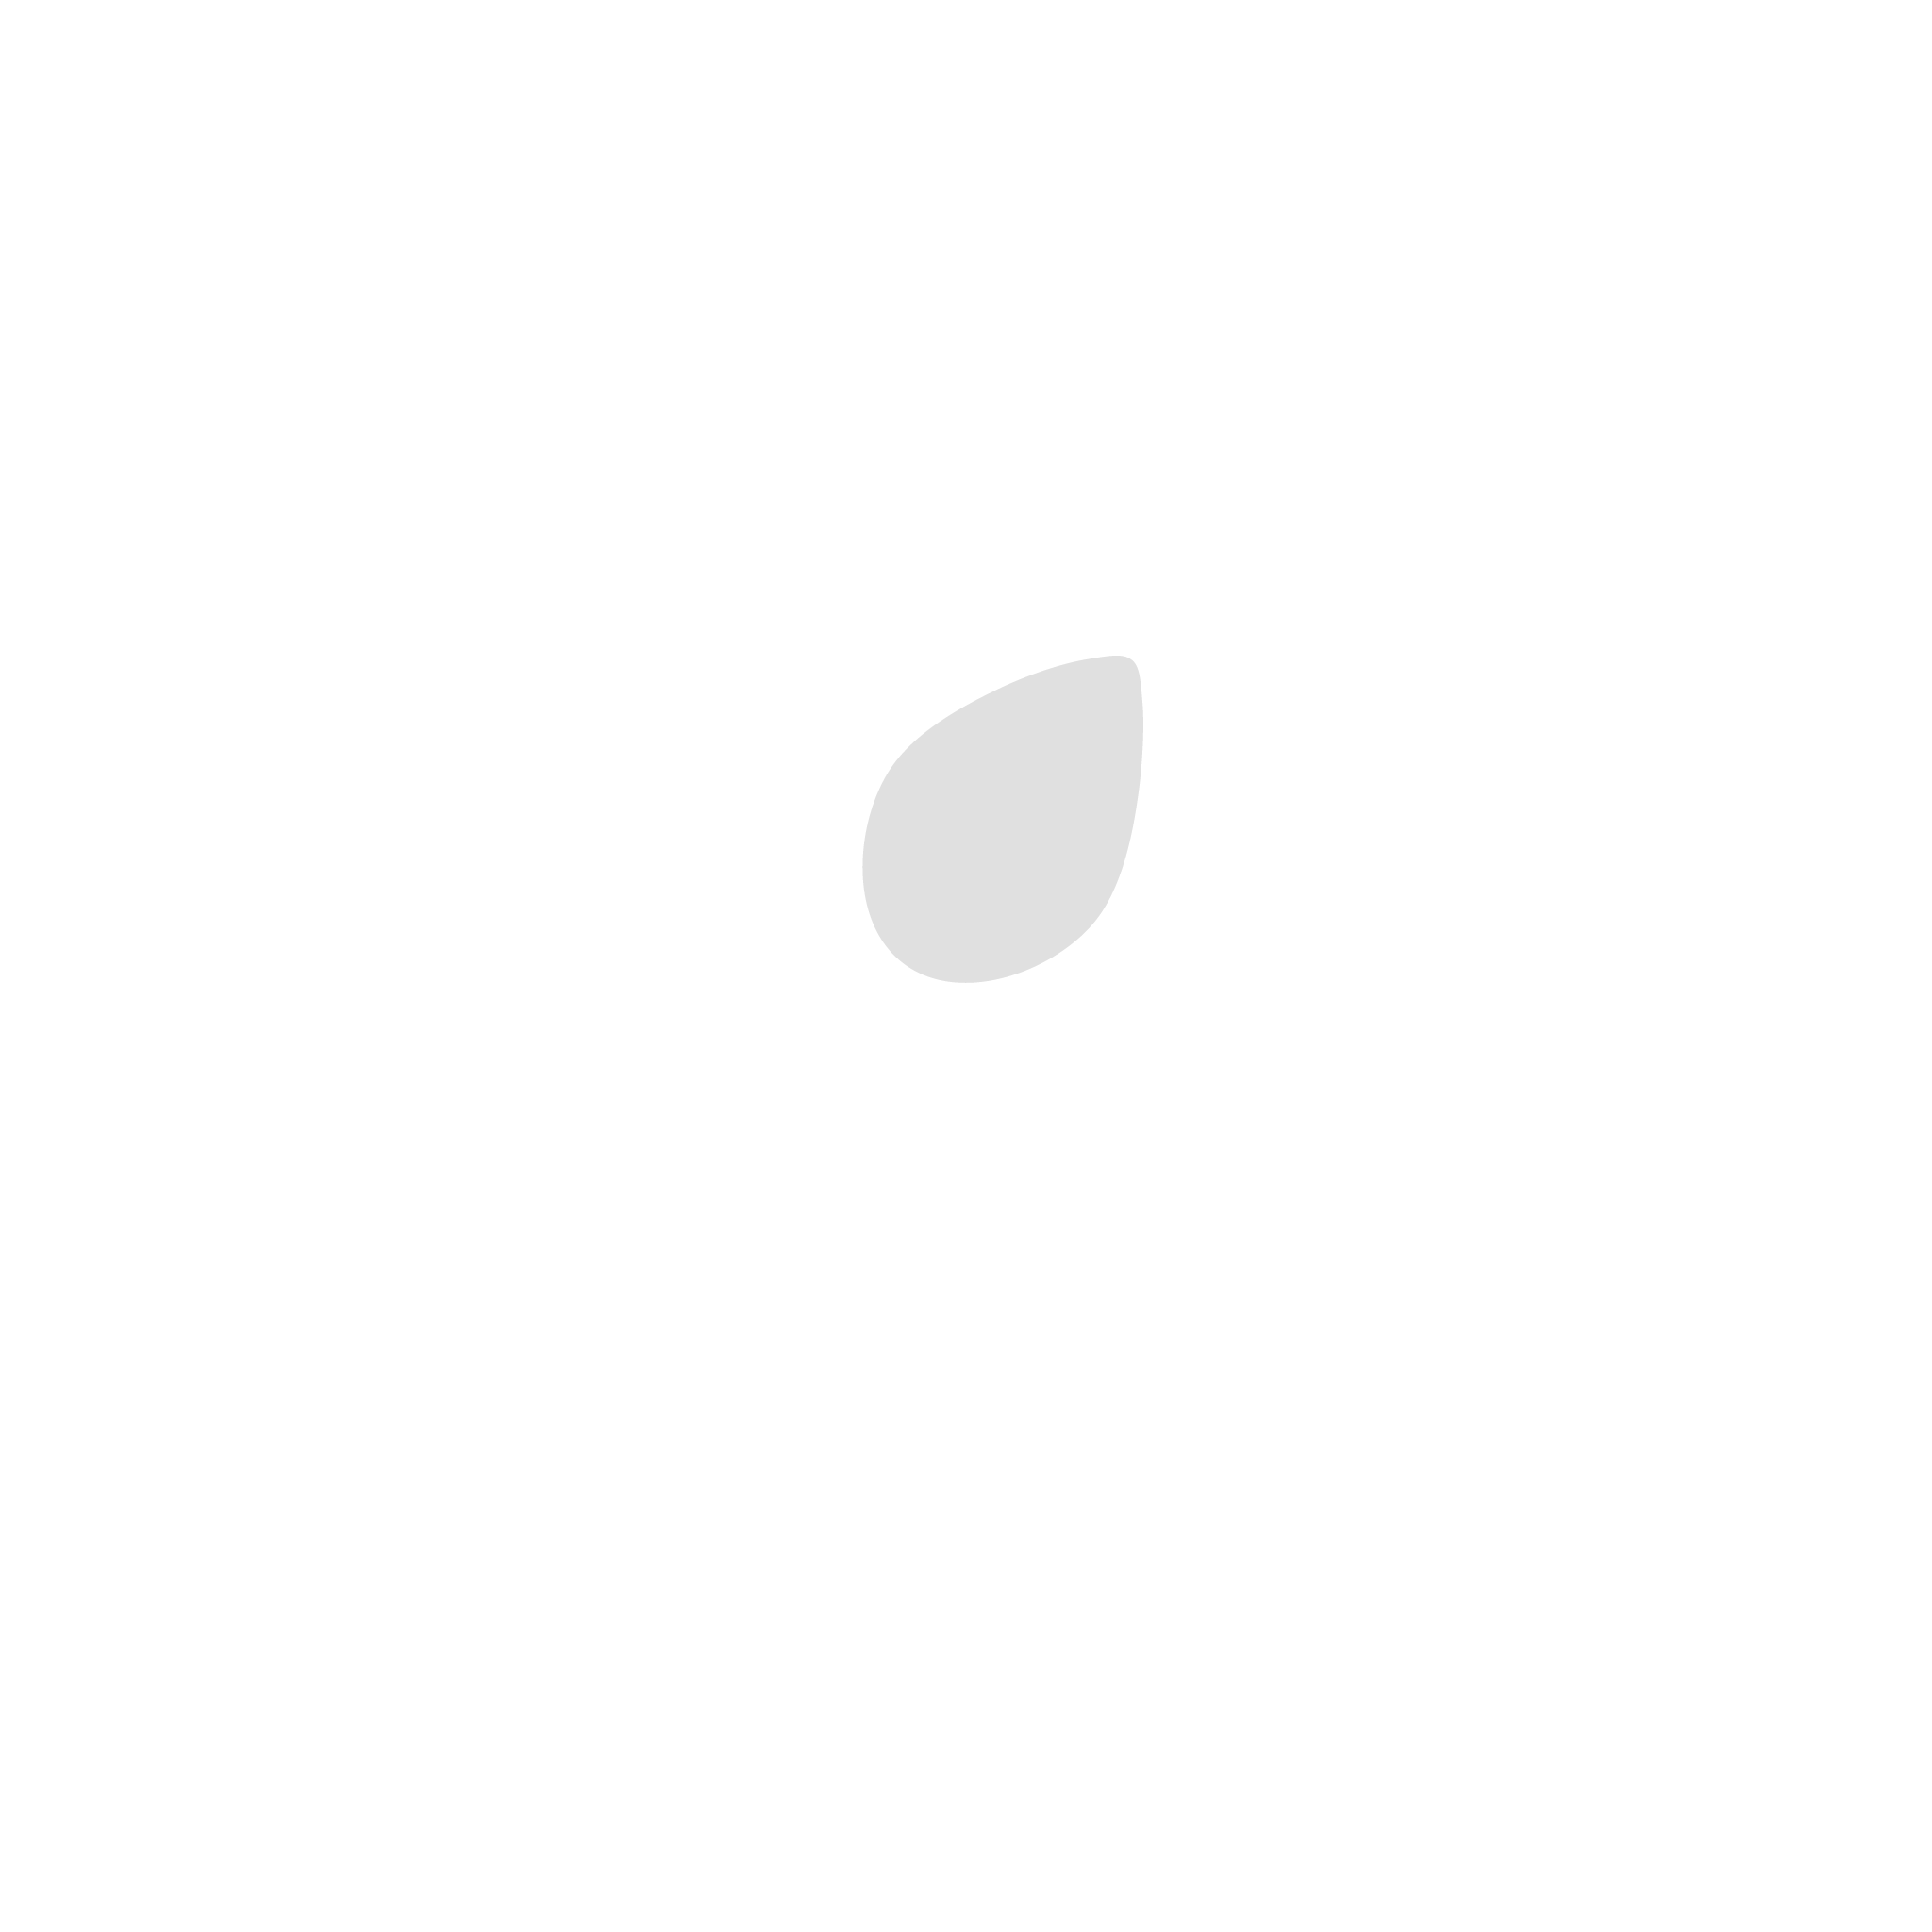 Sisu Design Studio_Grayscale Client Logos_White_Little Sprouts.png